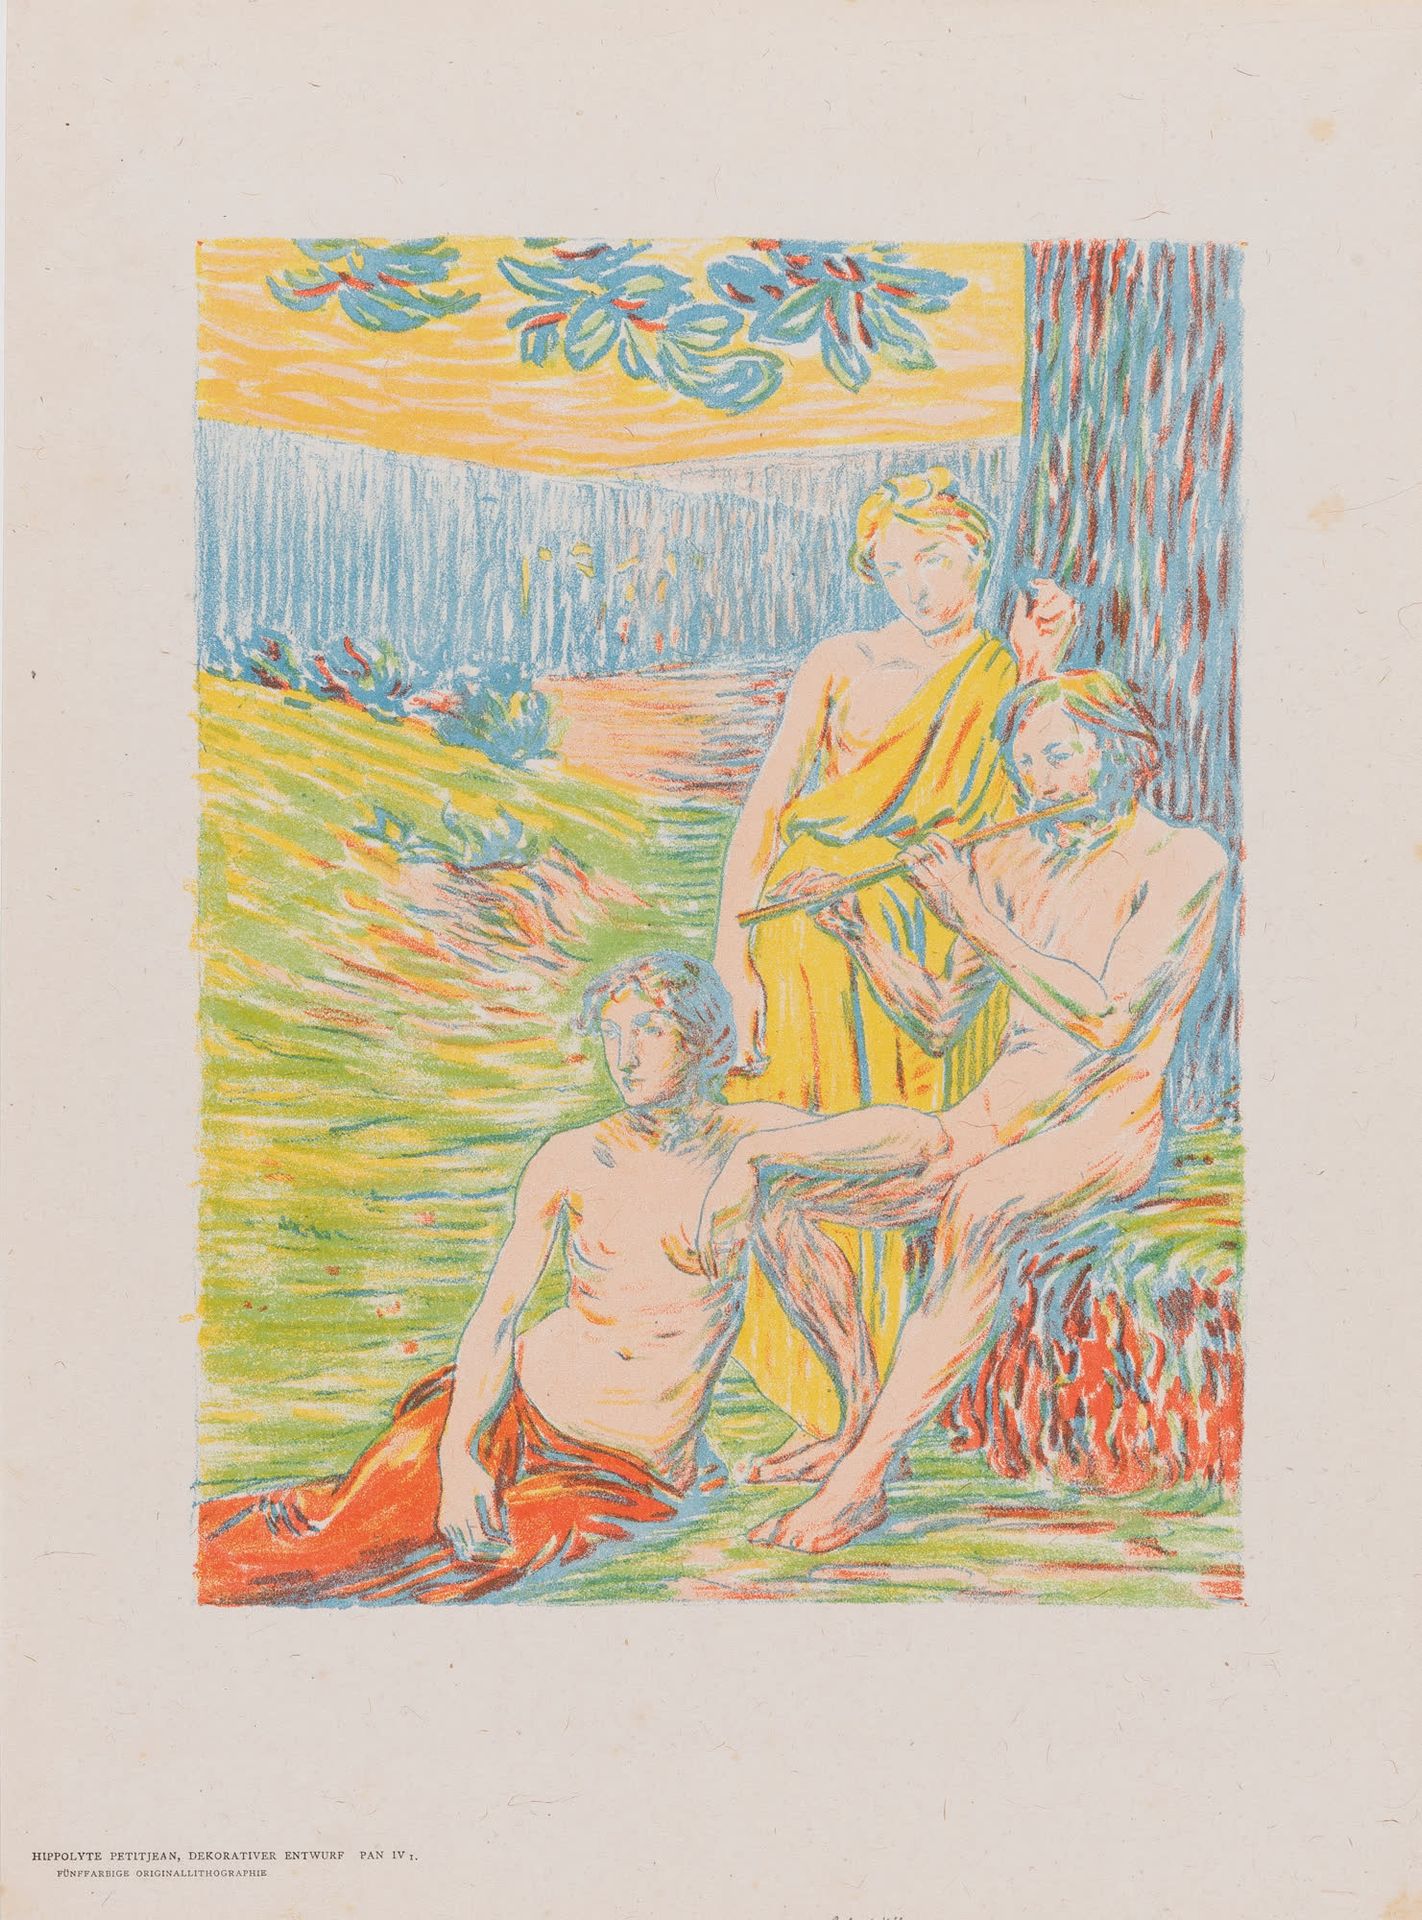 Hippolyte PETITJEAN (1854-1929) The God Pan, 1895.
Lithograph in colour.
Off-pri&hellip;